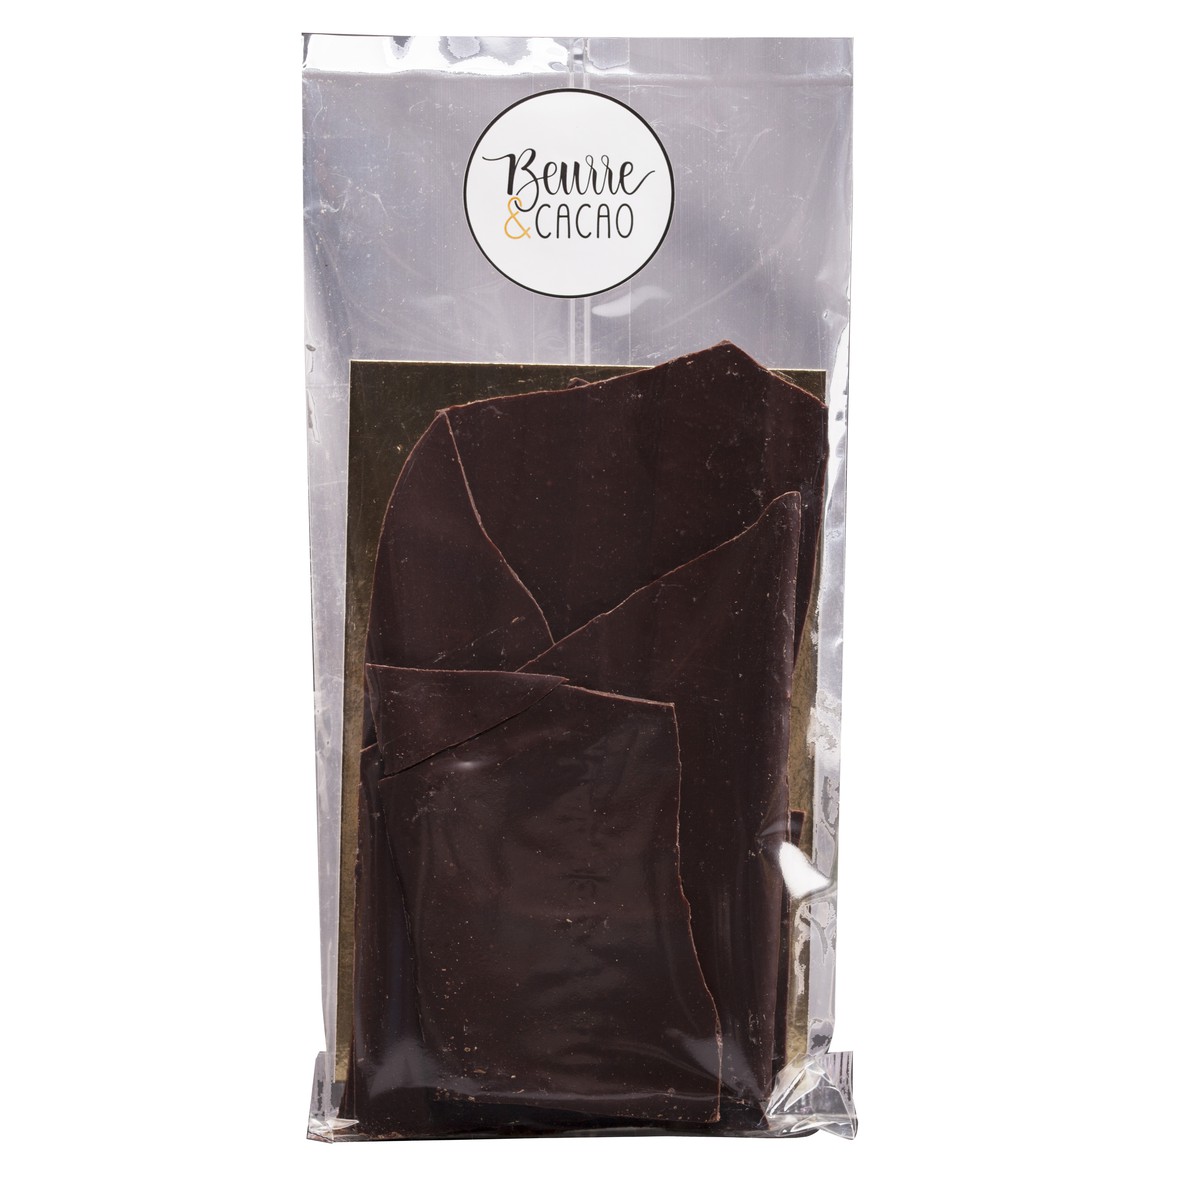 Beurre & Cacao  Eclats noirs 65% Passion, Grand Cru  100gr